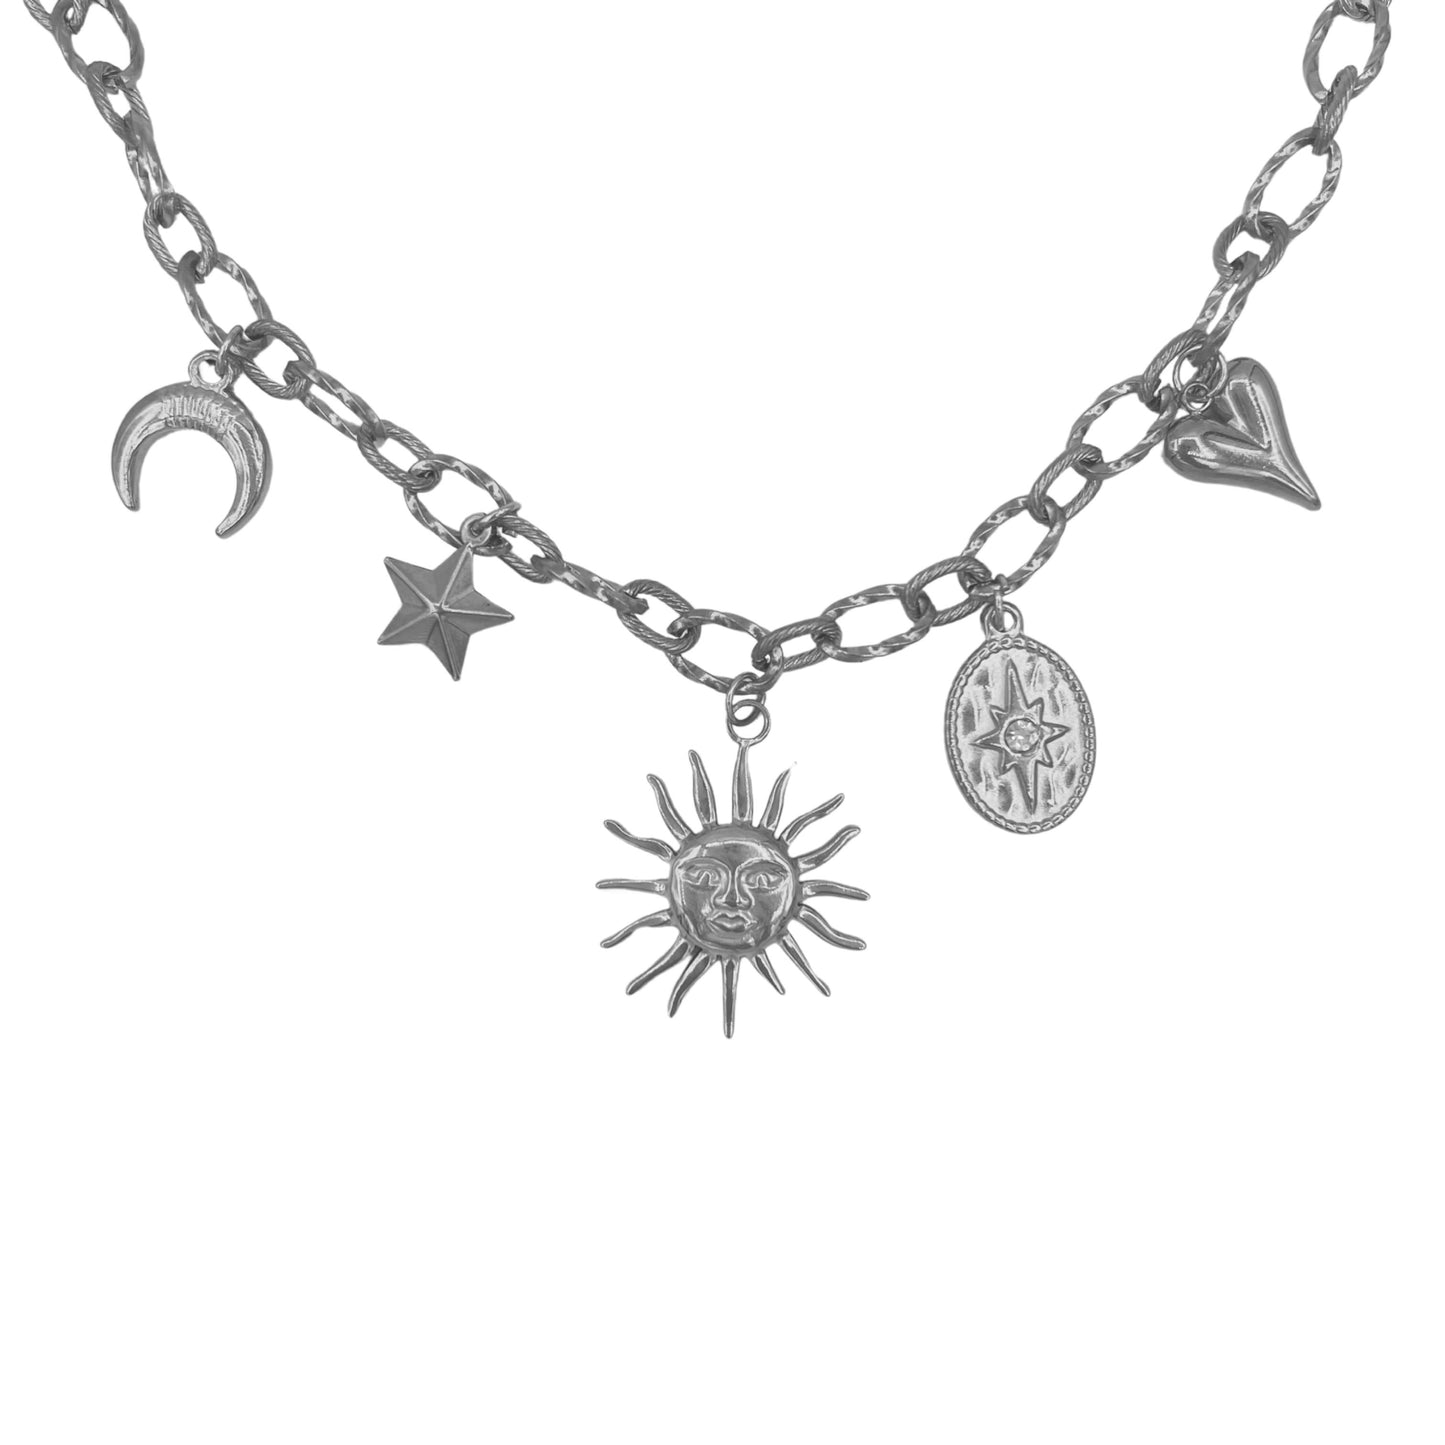 cosmic charms ketting - zilver